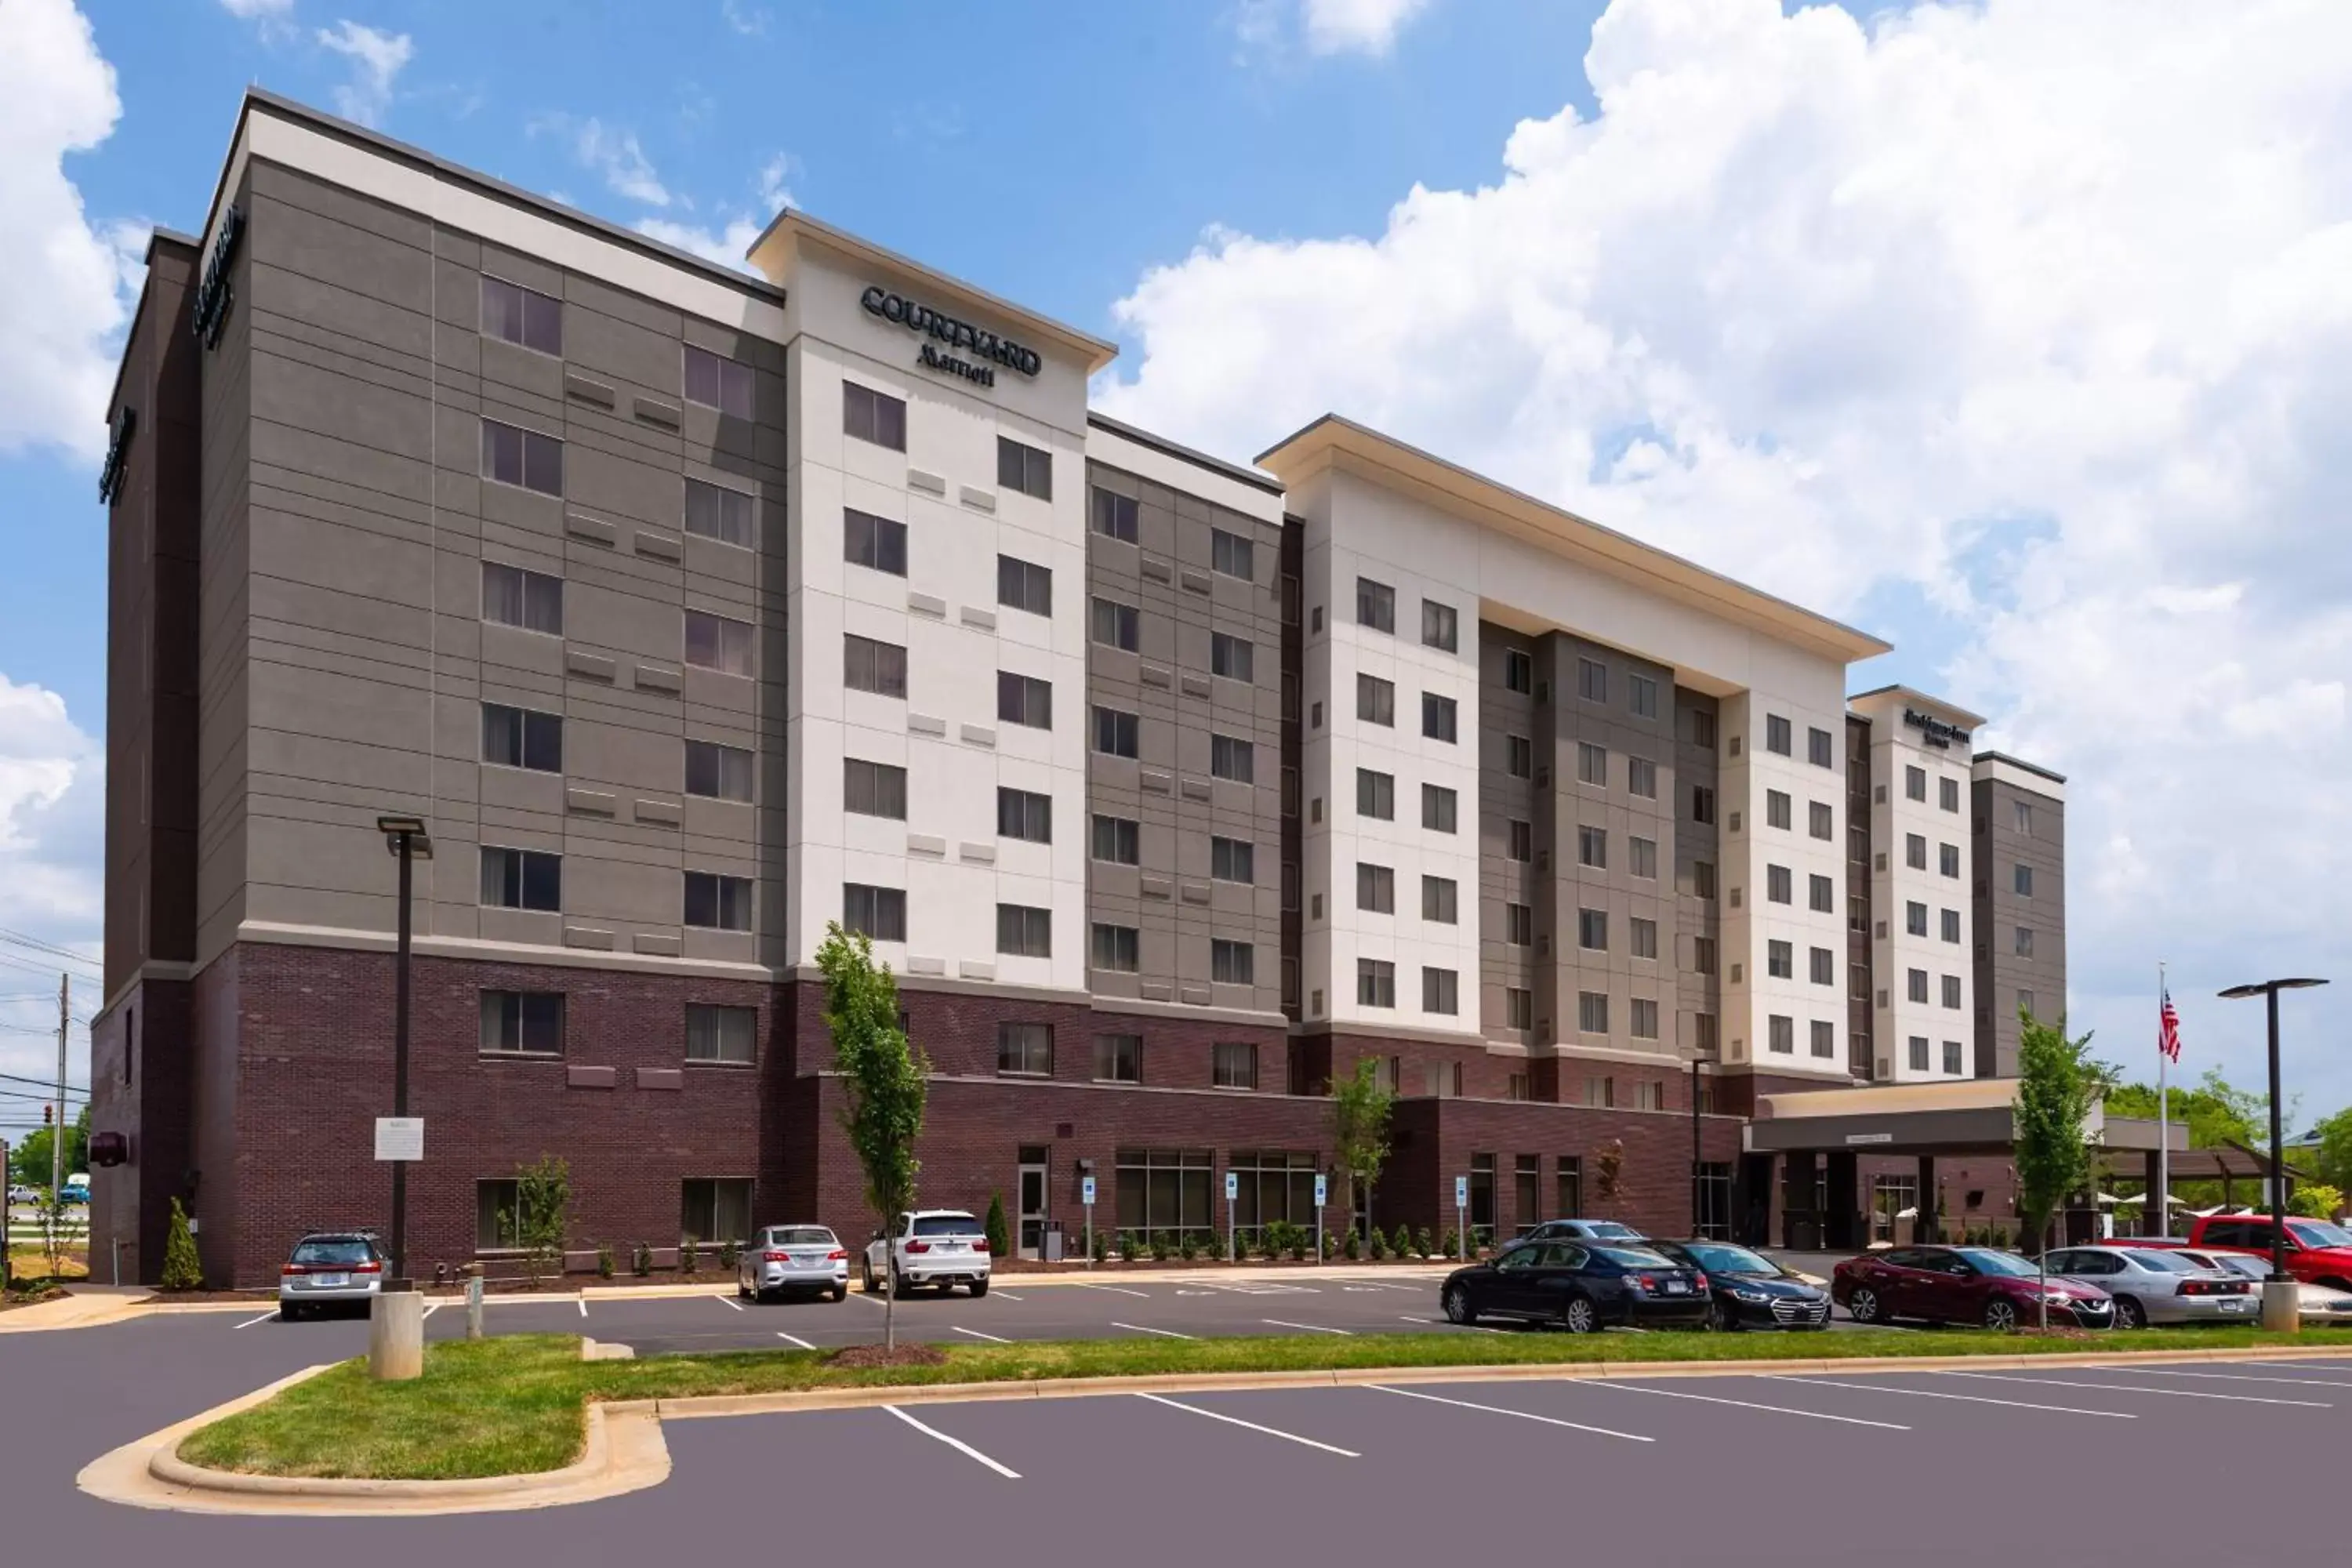 Property Building in Courtyard by Marriott Charlotte Northlake